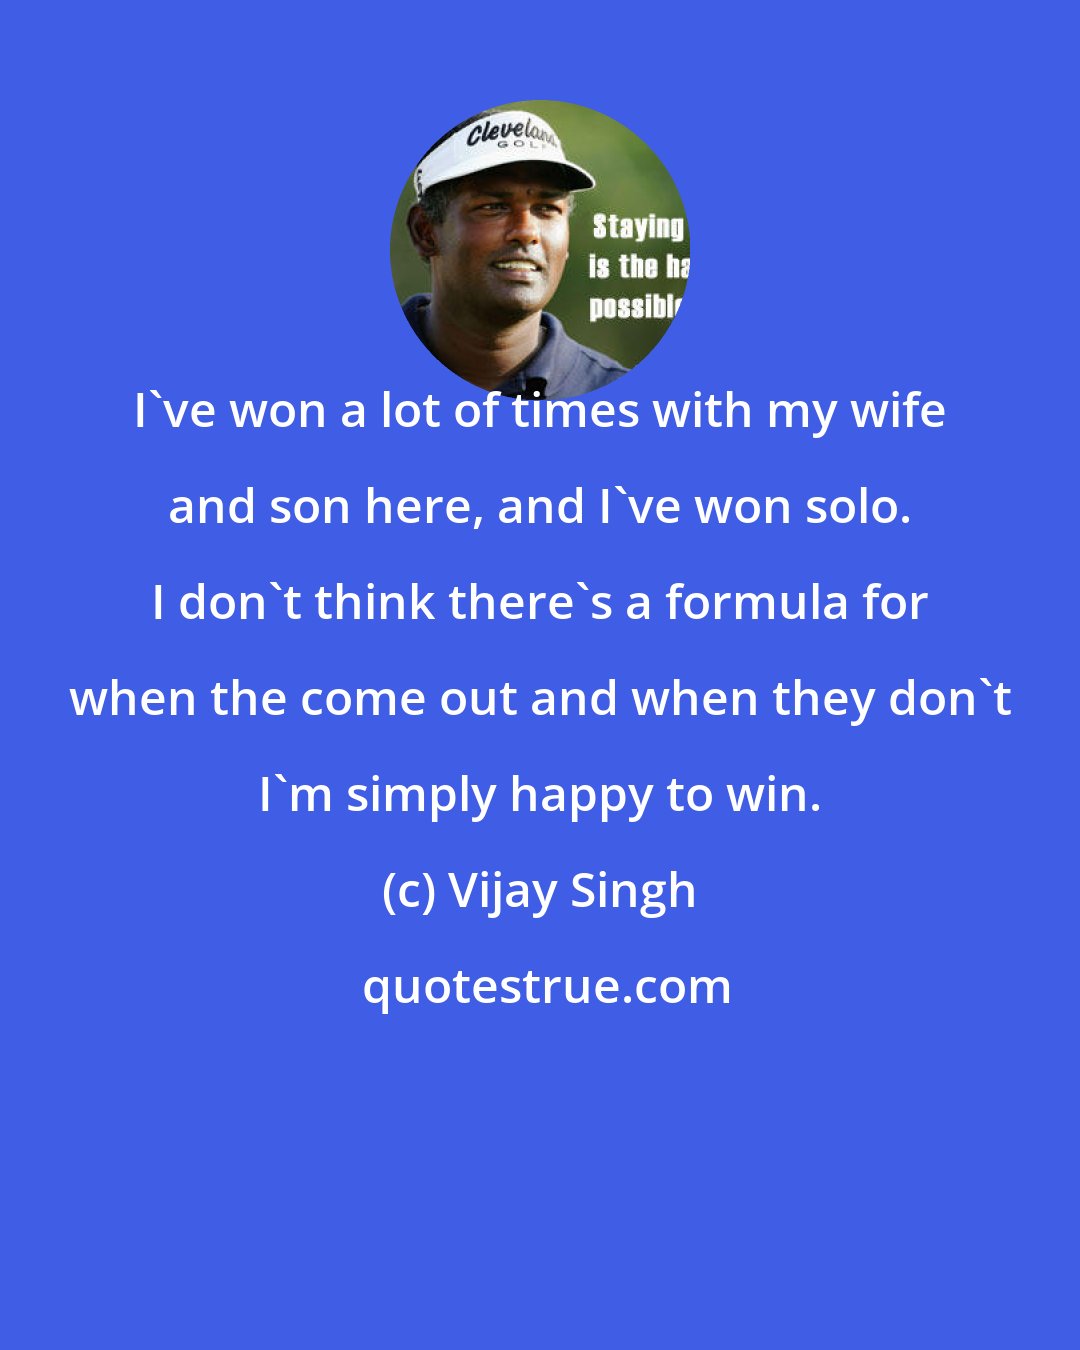 Vijay Singh: I've won a lot of times with my wife and son here, and I've won solo. I don't think there's a formula for when the come out and when they don't I'm simply happy to win.